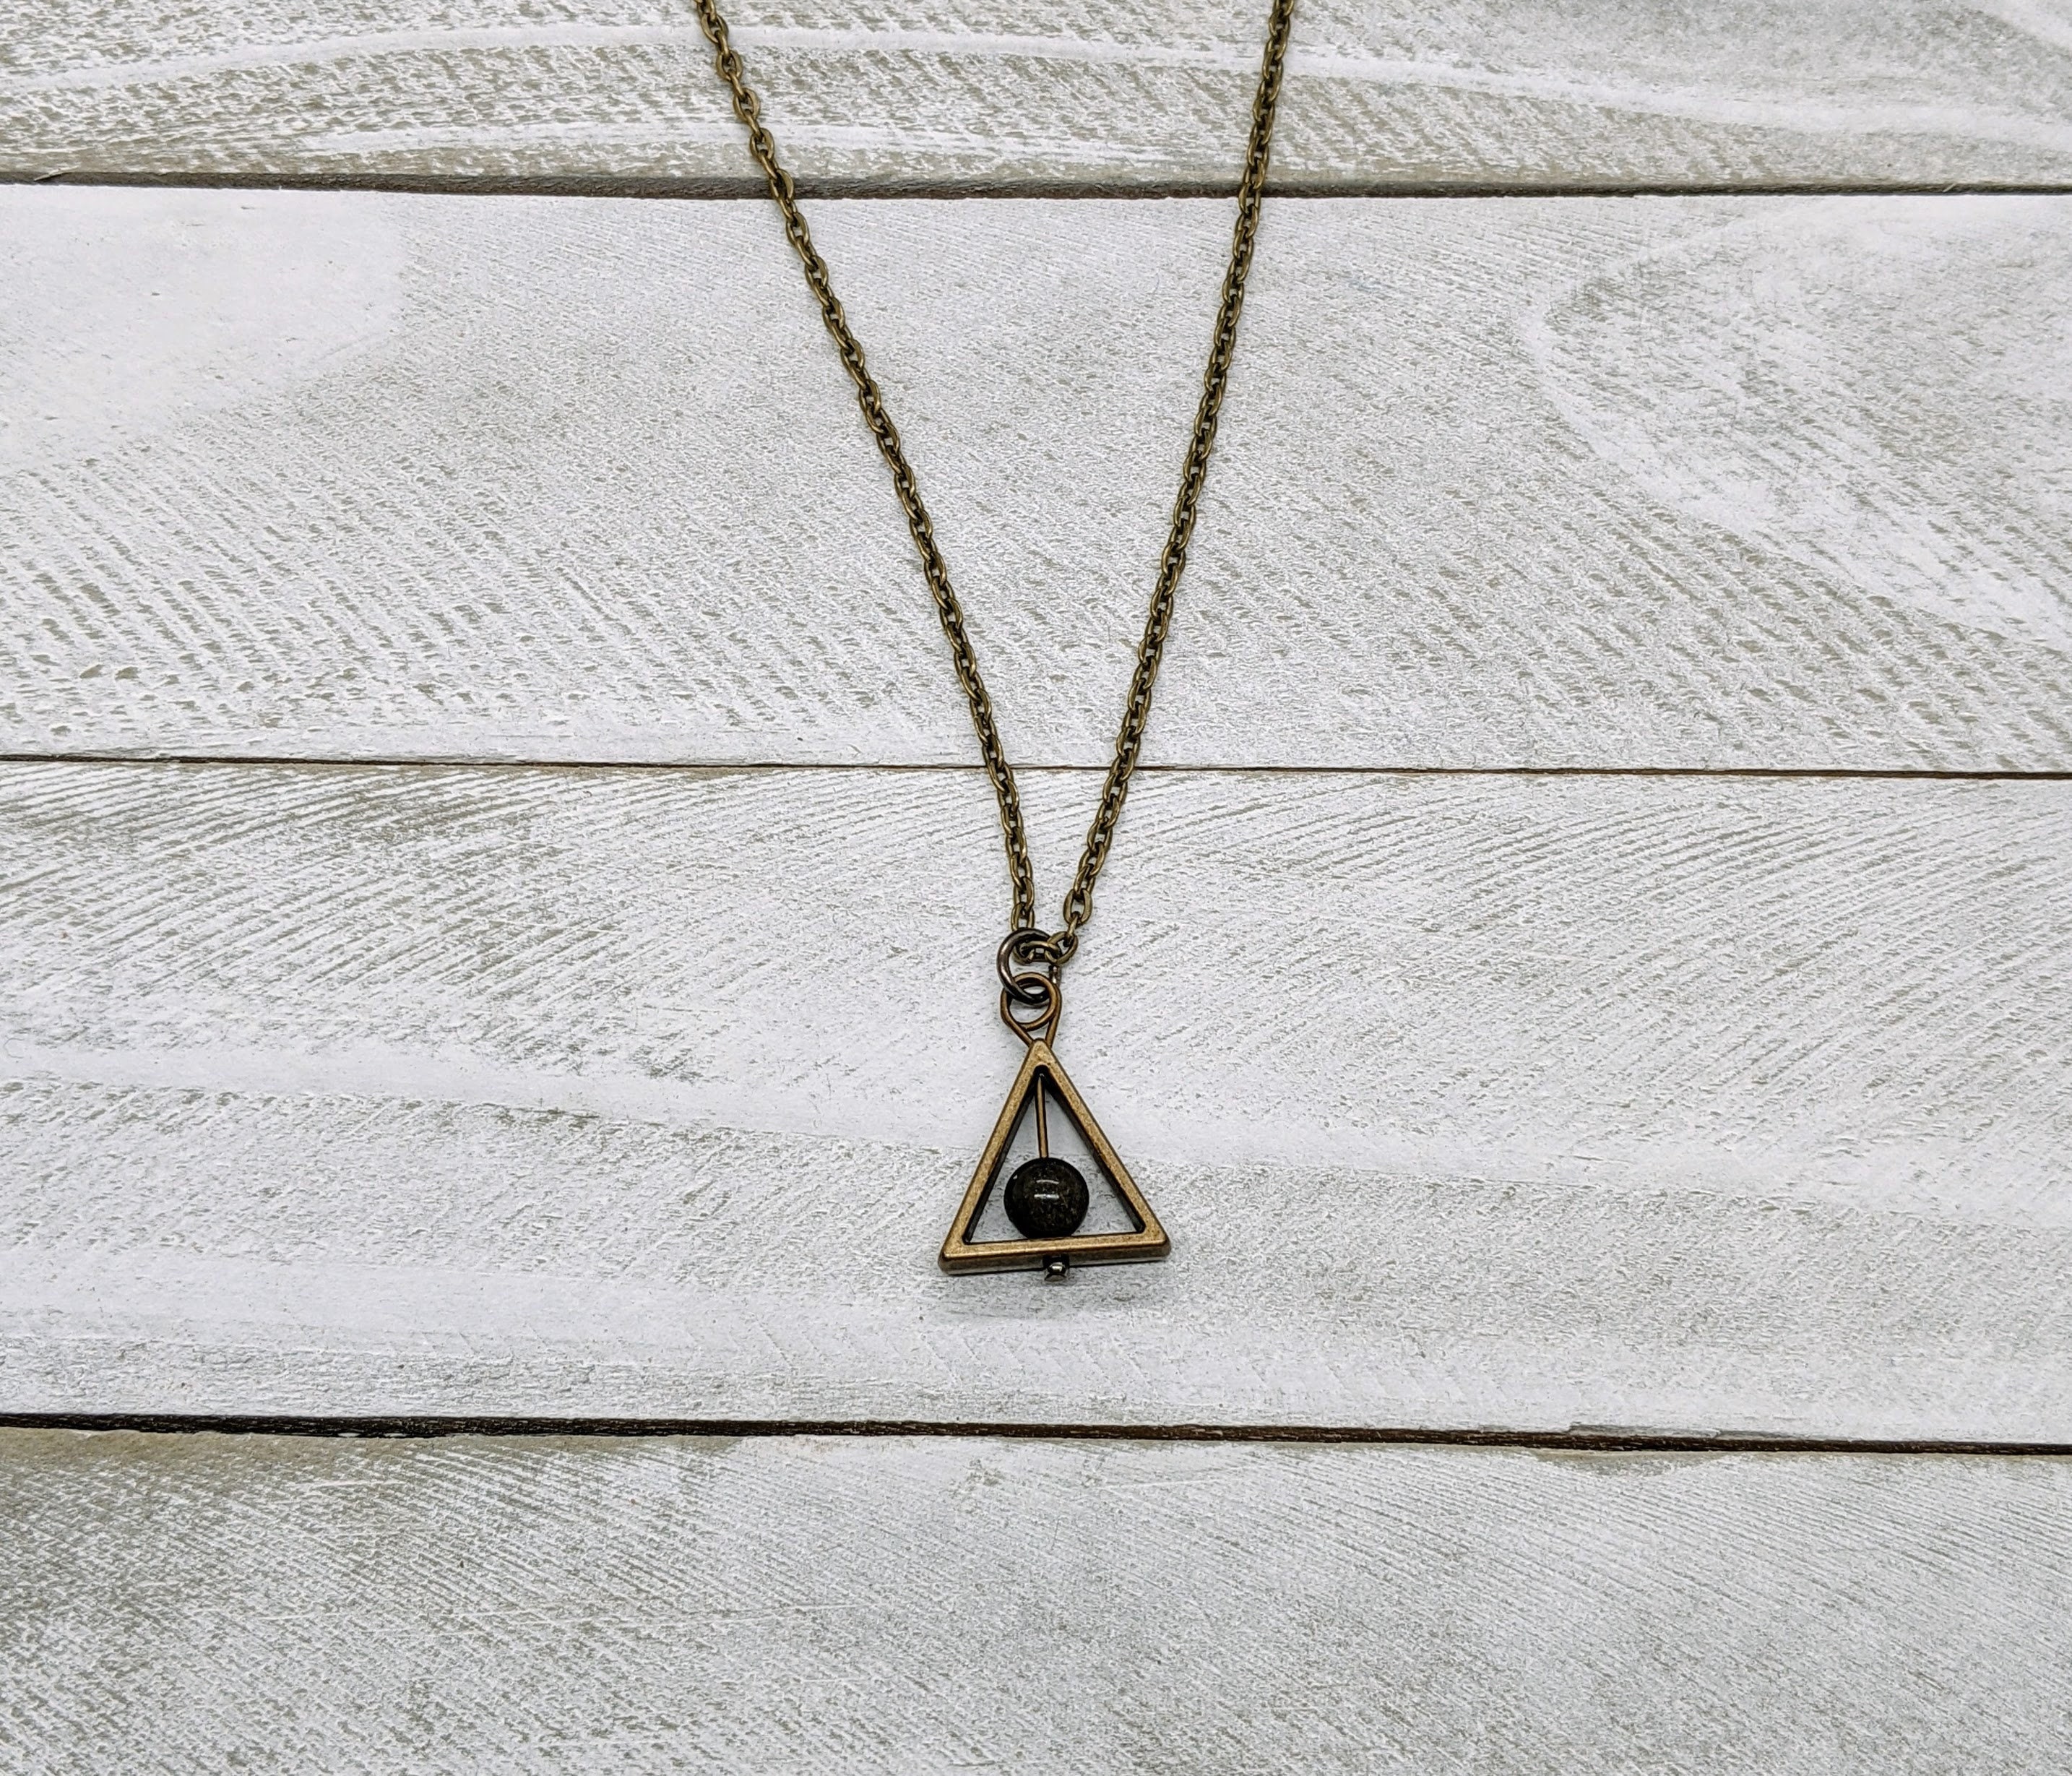 deathly hallows jewelry products for sale | eBay